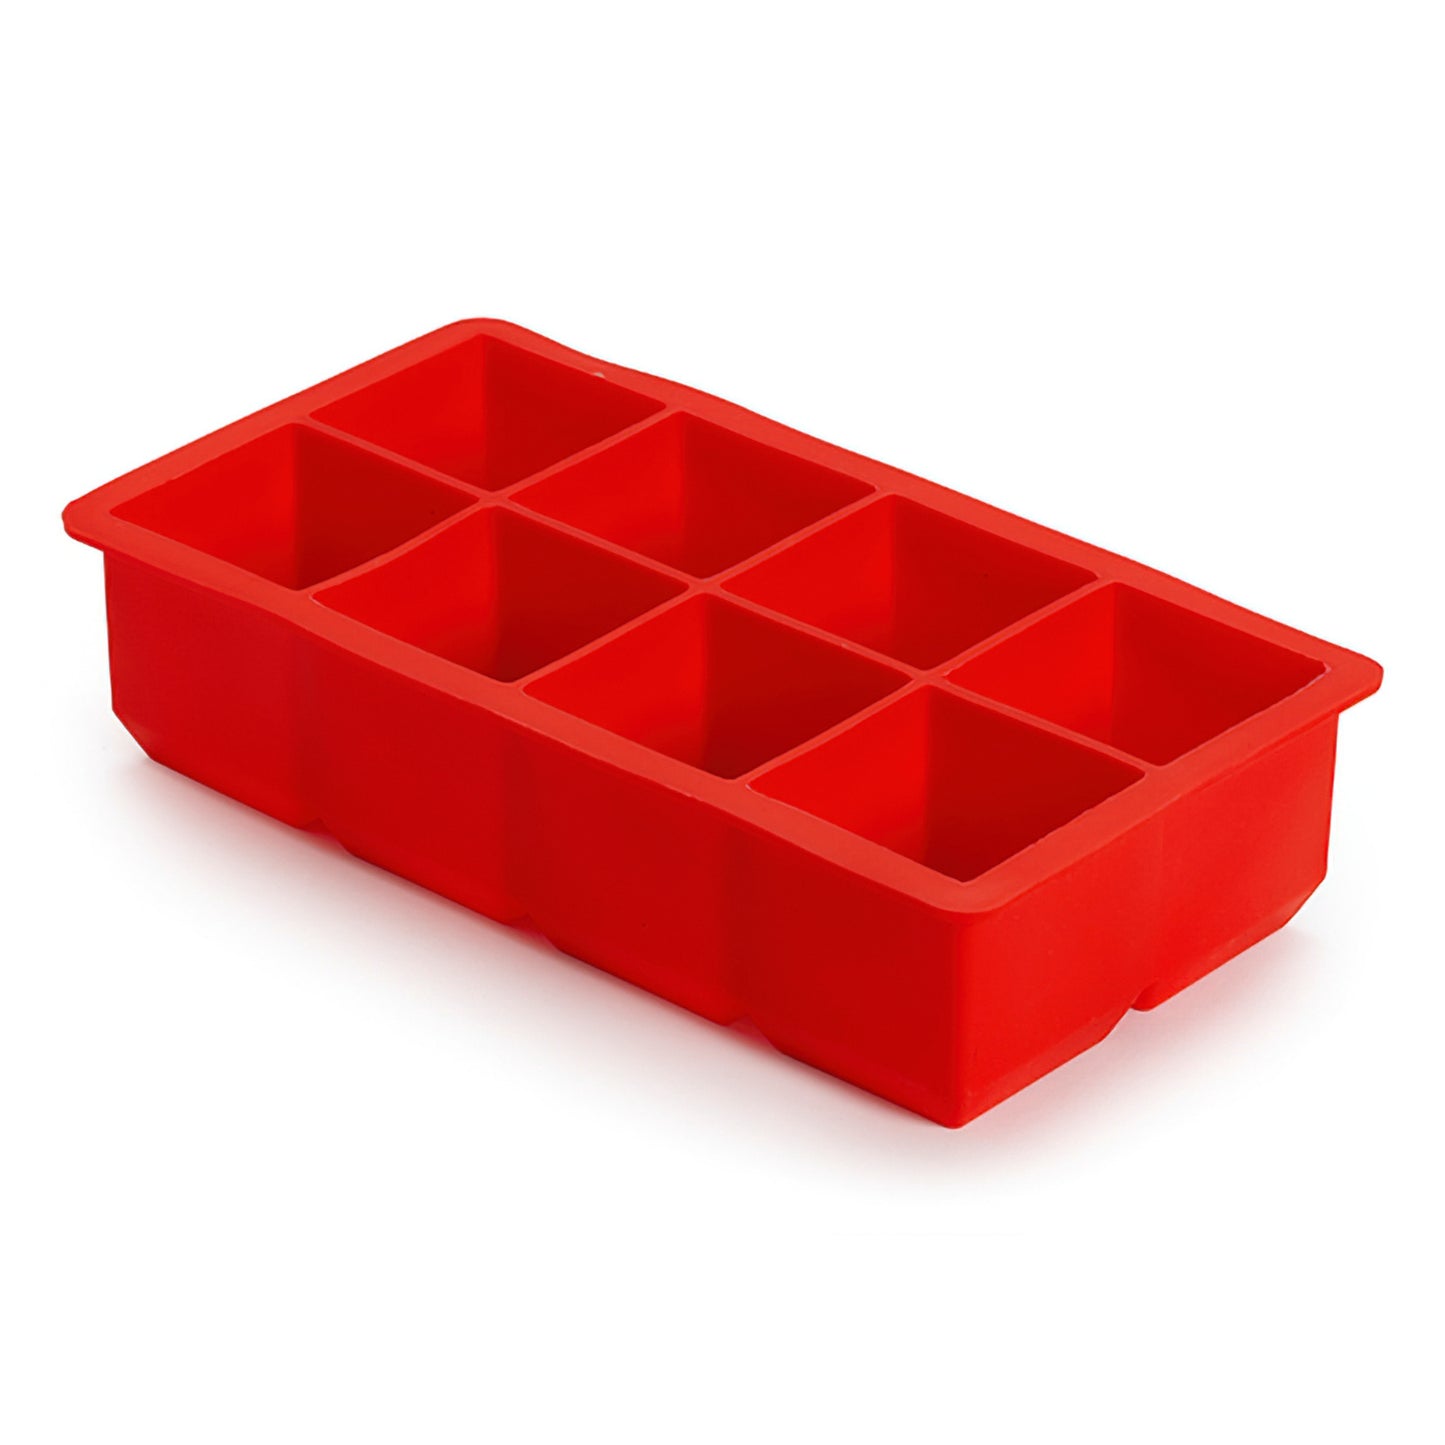 8.25" x 4.3" Silicone Ice Cube Tray w/ 8-Square Compartments, 1.9" tall